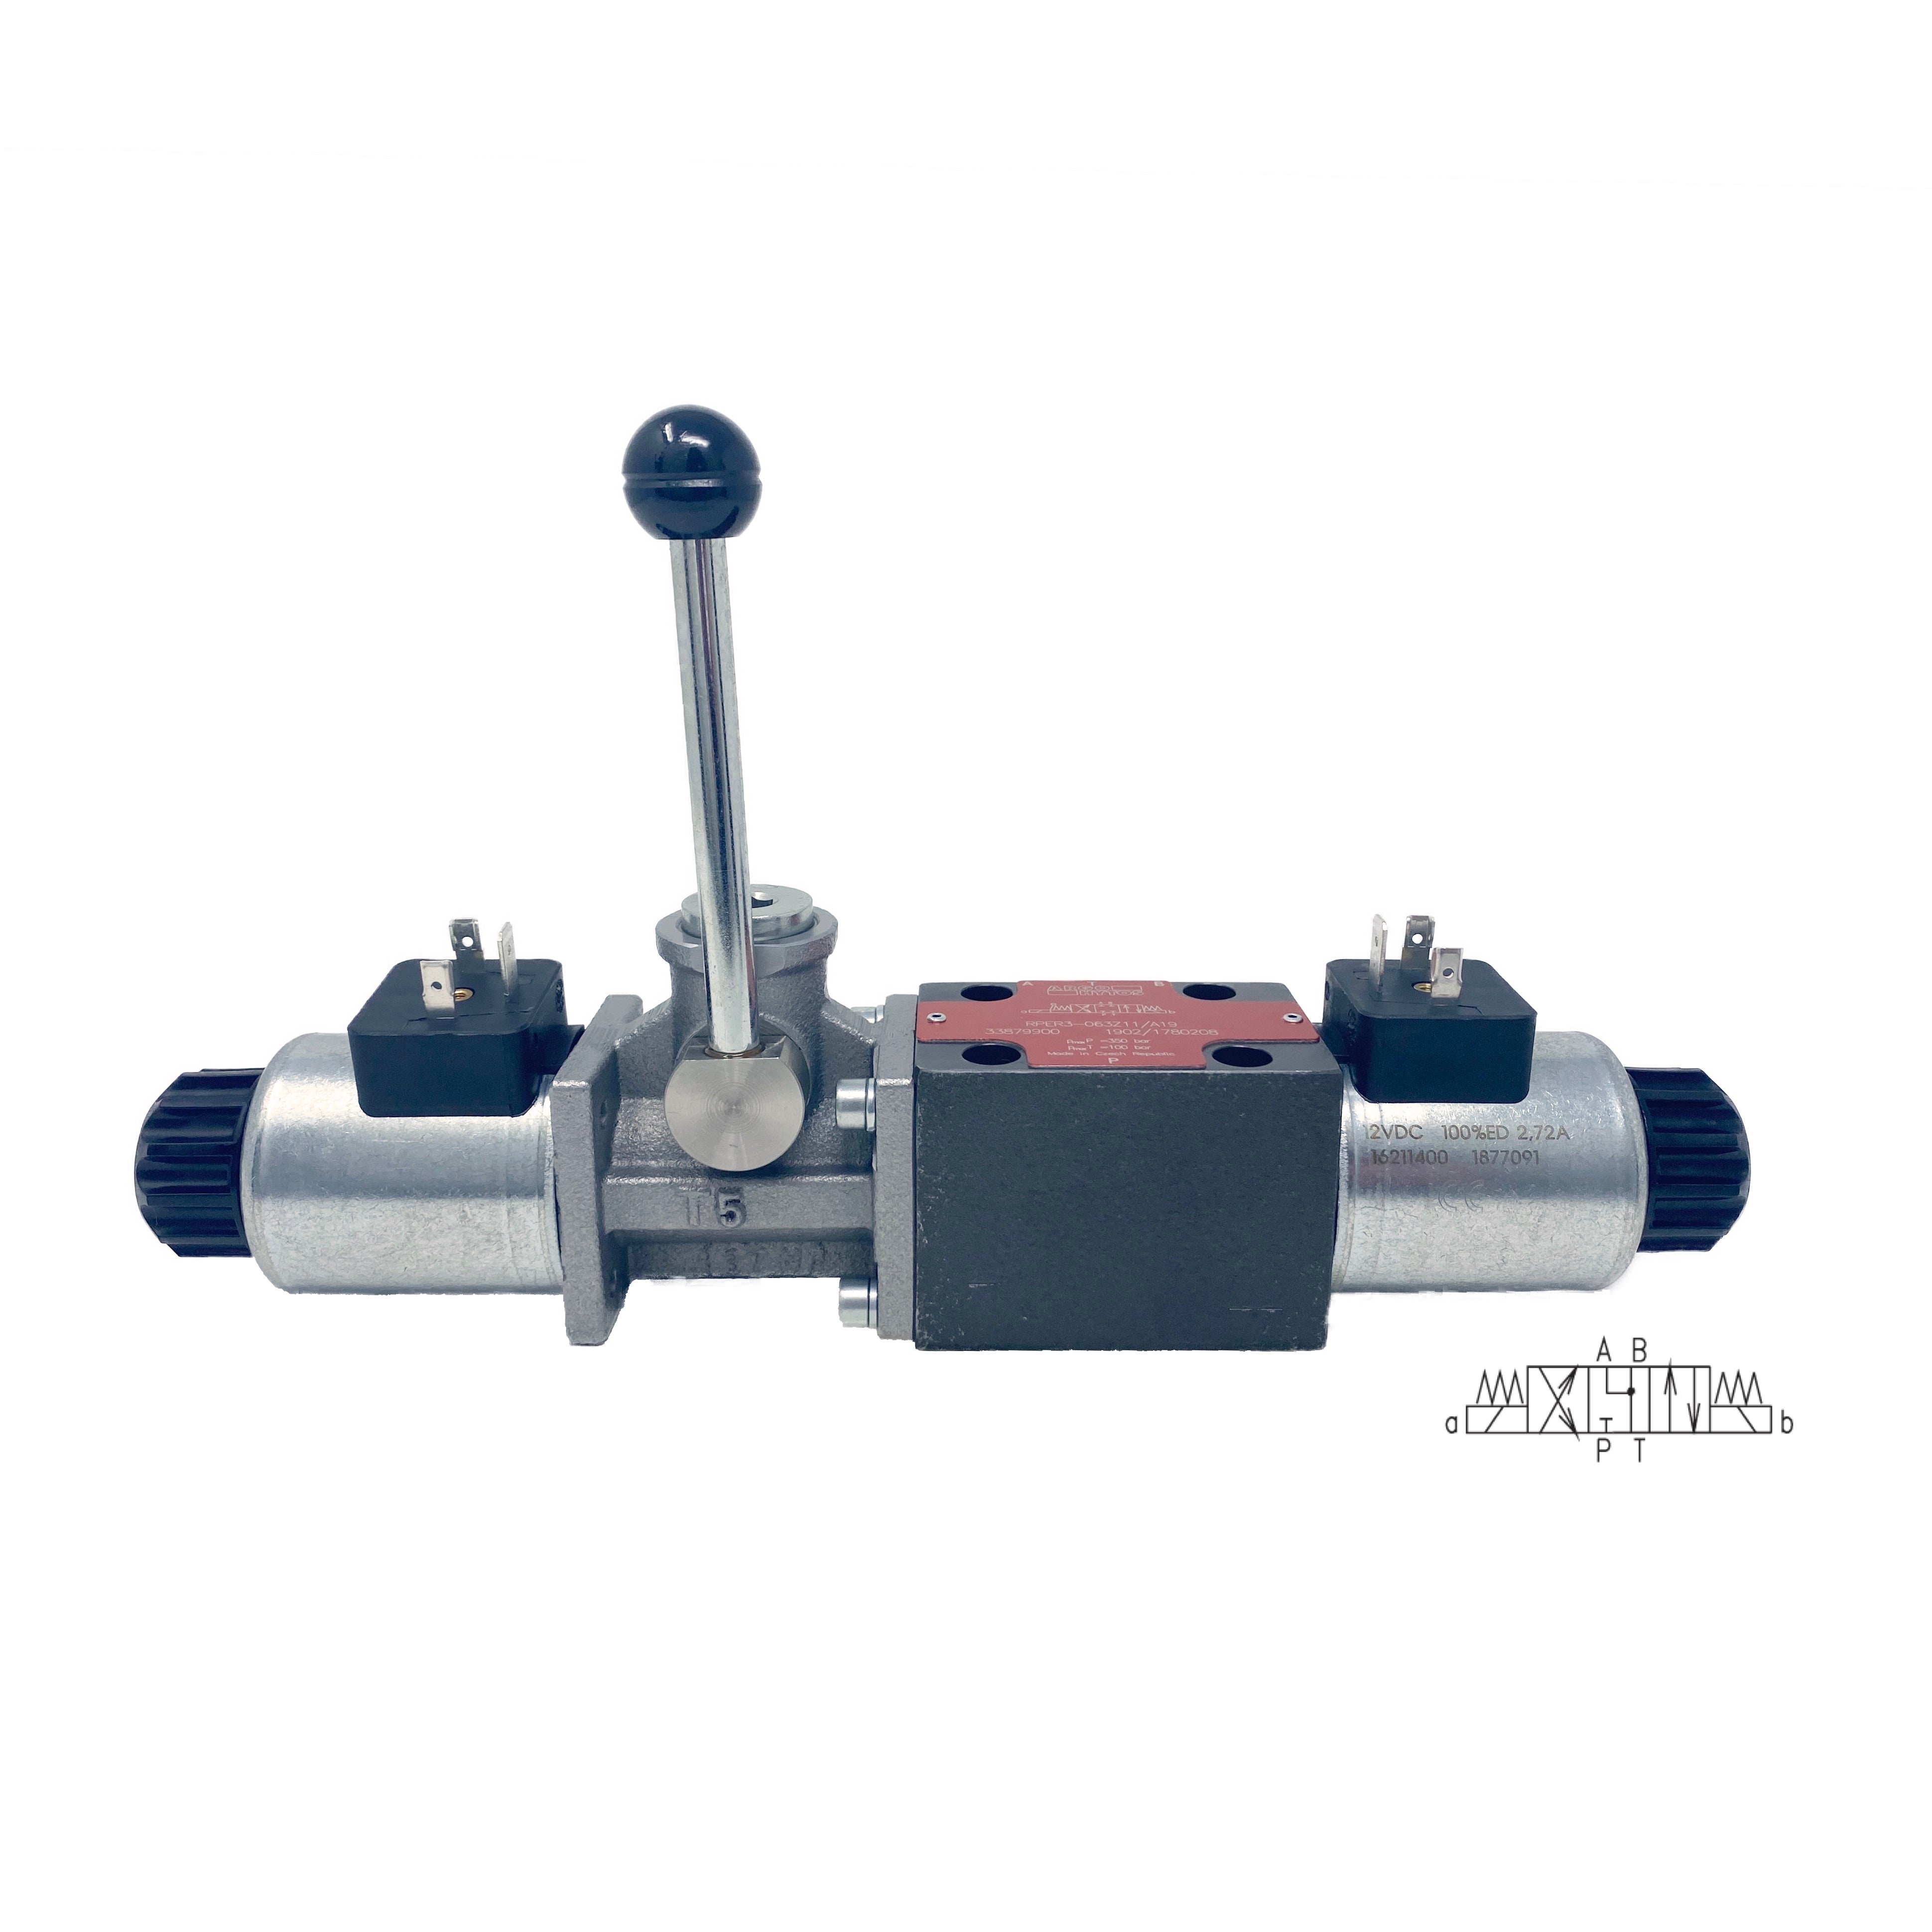 RPER3-063Y11/12060E5/A19 : Argo Directional Control Valve w/ Override Lever, D03, 21GPM, 5100psi, 3P4W, 120 VAC, 60Hz, DIN, Spring Centered, Motor Spool